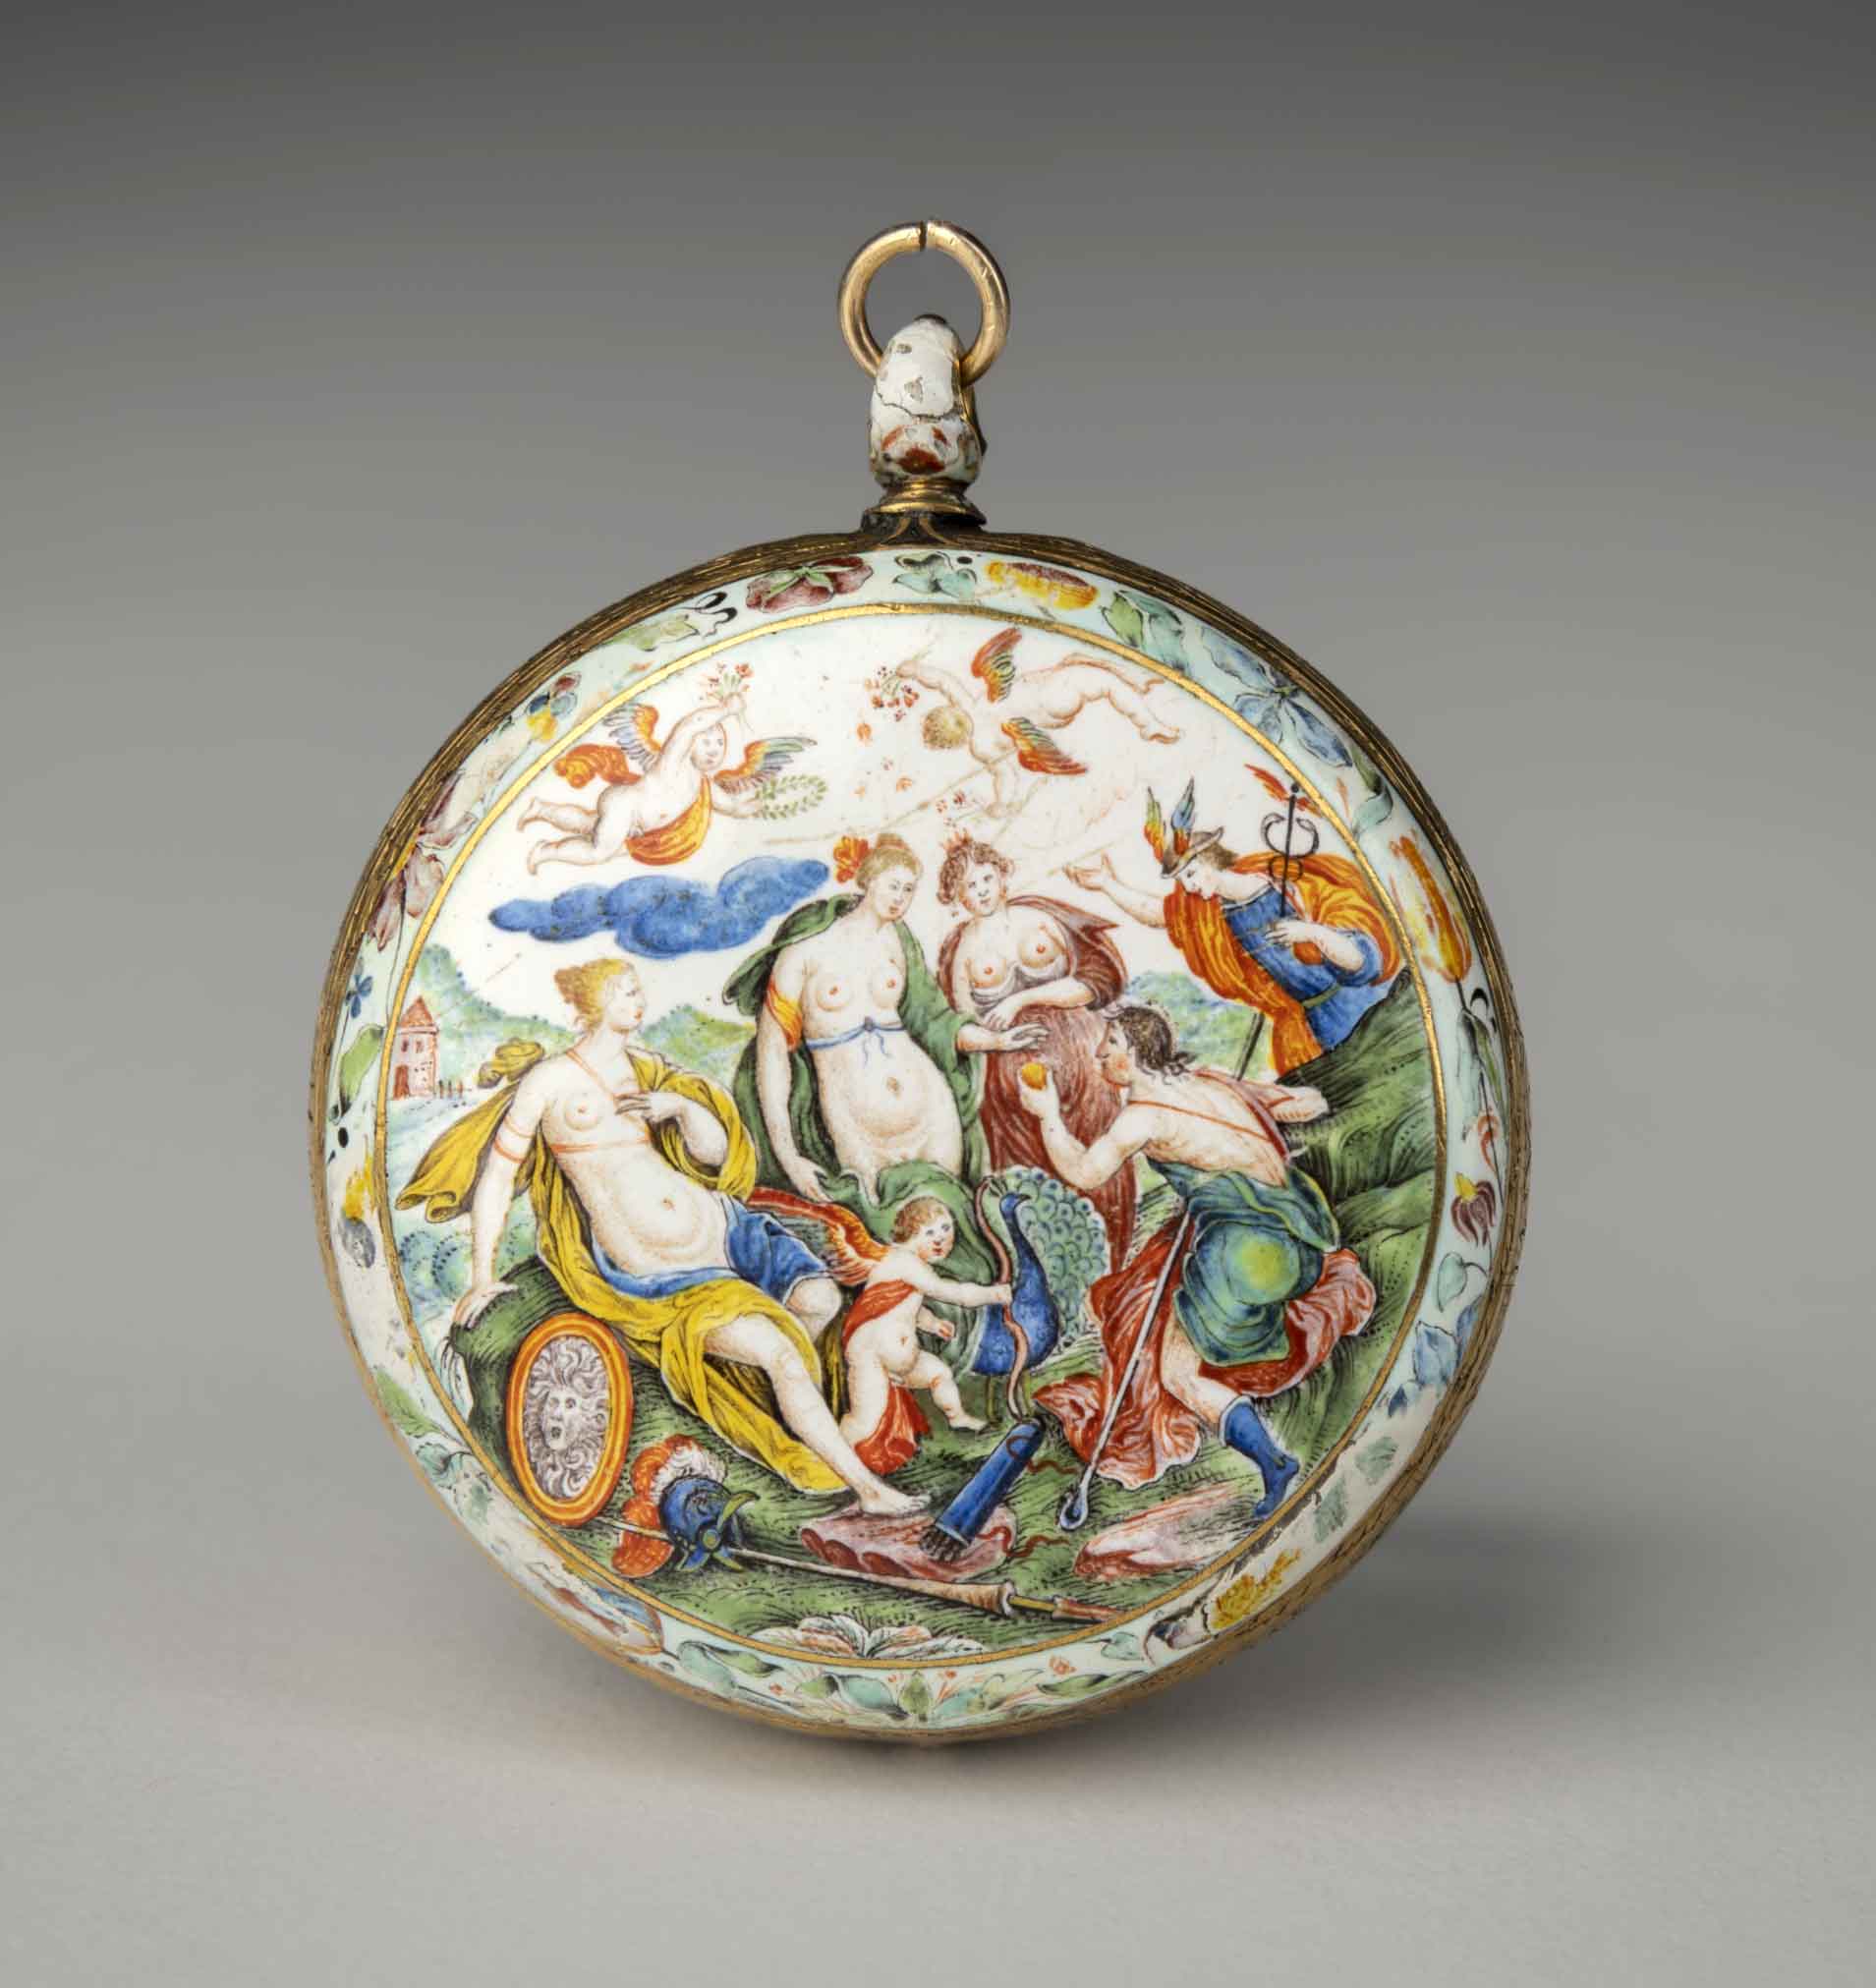 Caspar Cameel (French, active from about 1625), watchmaker, Watch with the Judgment of Paris, about 1640, with early- to mid-17th-century movement (Strasbourg, France), probably Blois, France, enamel on copper with brass band, gilded metal hand, and modern crystal. Taft Museum of Art, 1932.64